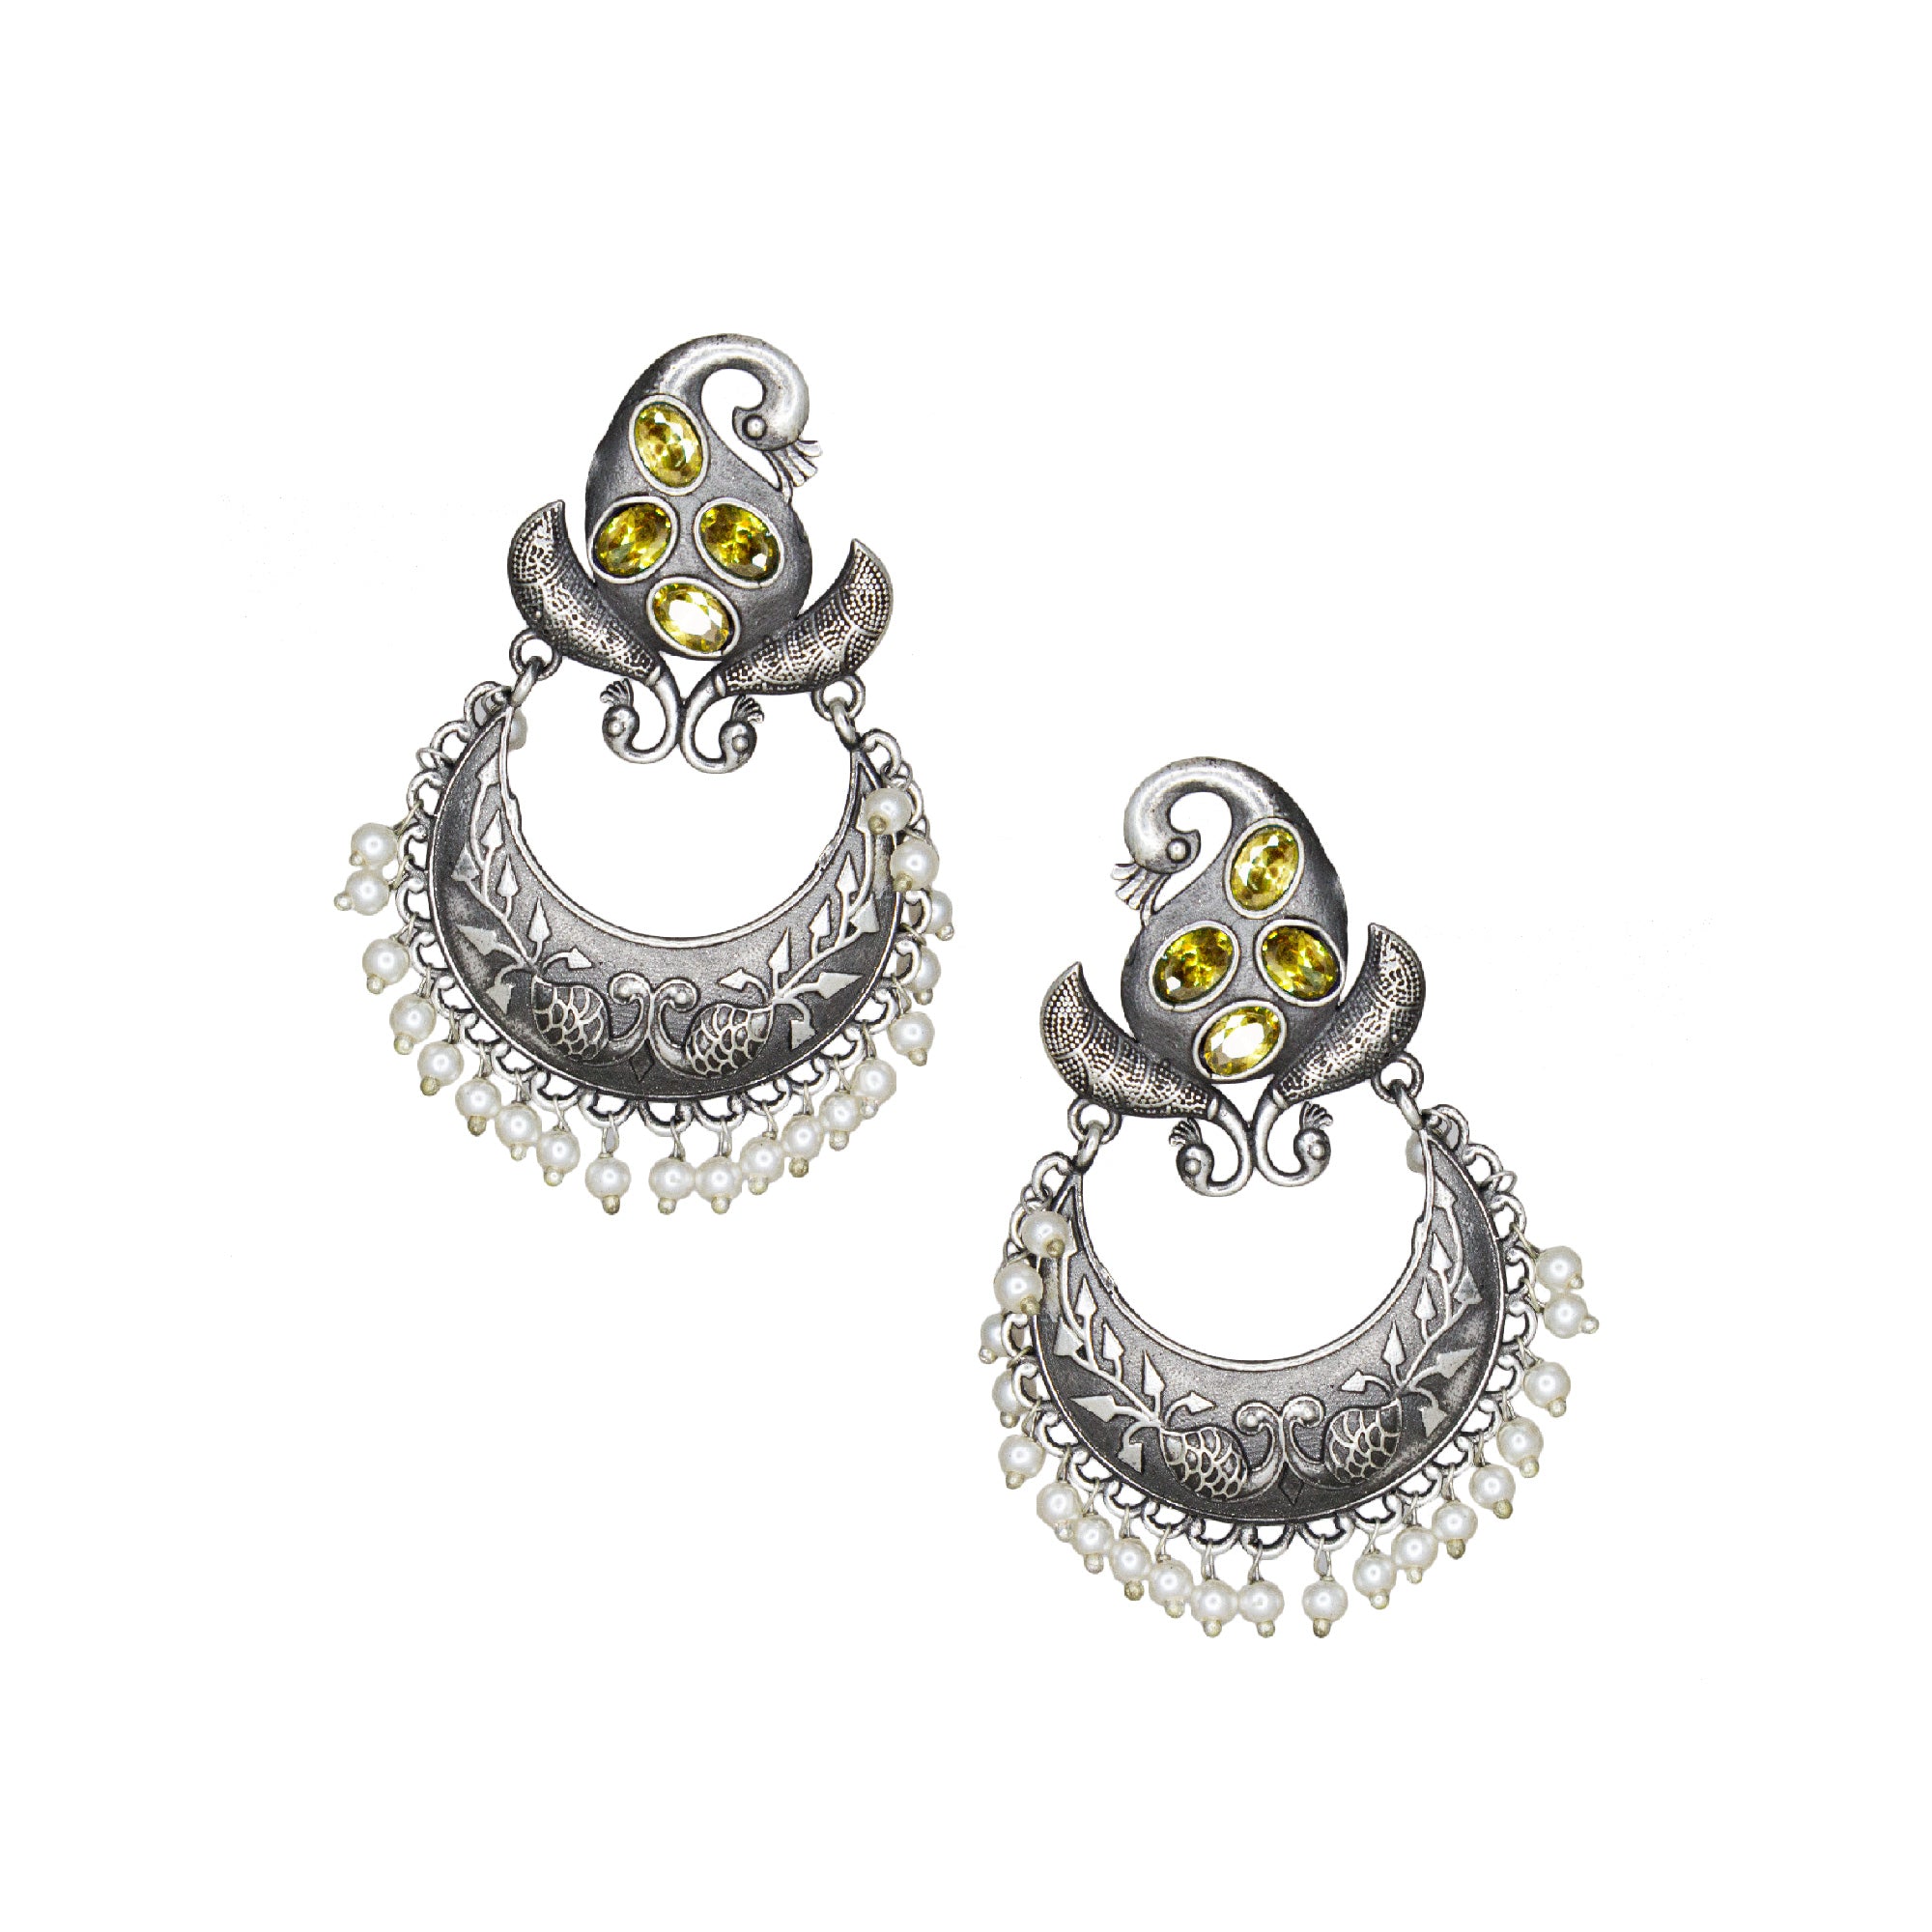 Abhinn Silver Replica Peacock Design Studs With Green CZ Stones Studded Earrings for Women